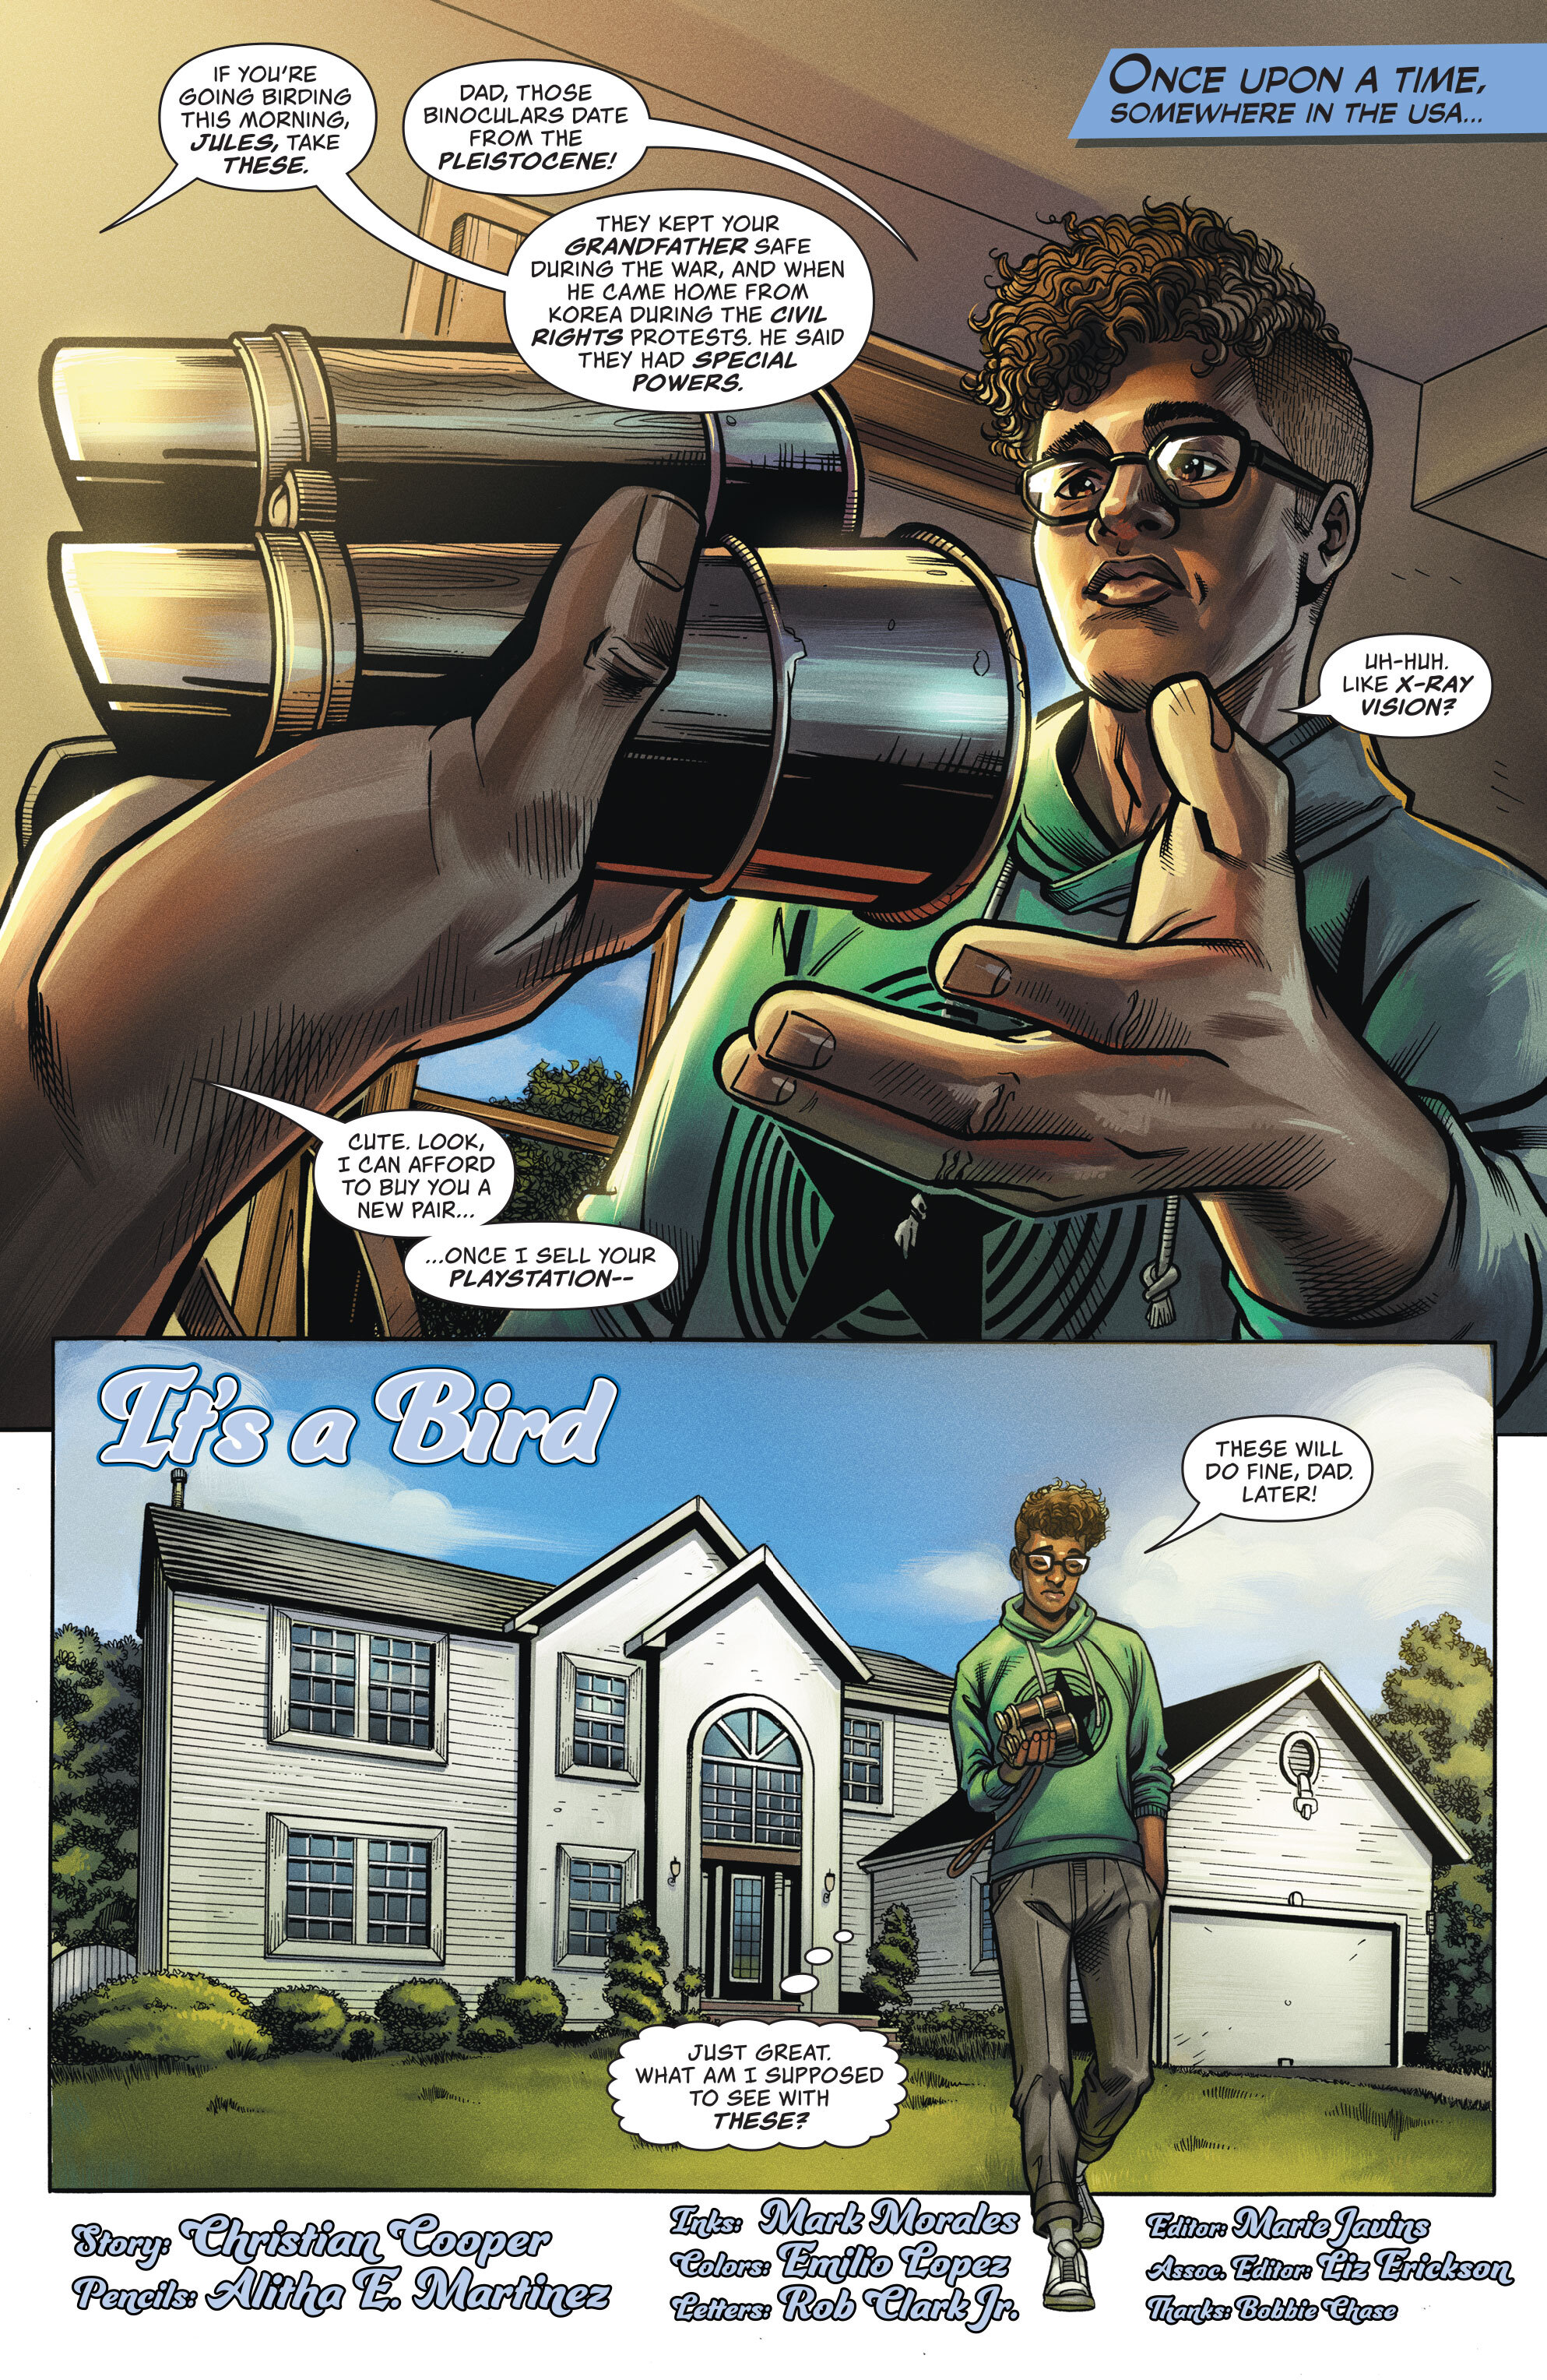 Page 1 of "It’s a Bird." Courtesy of DC Comics